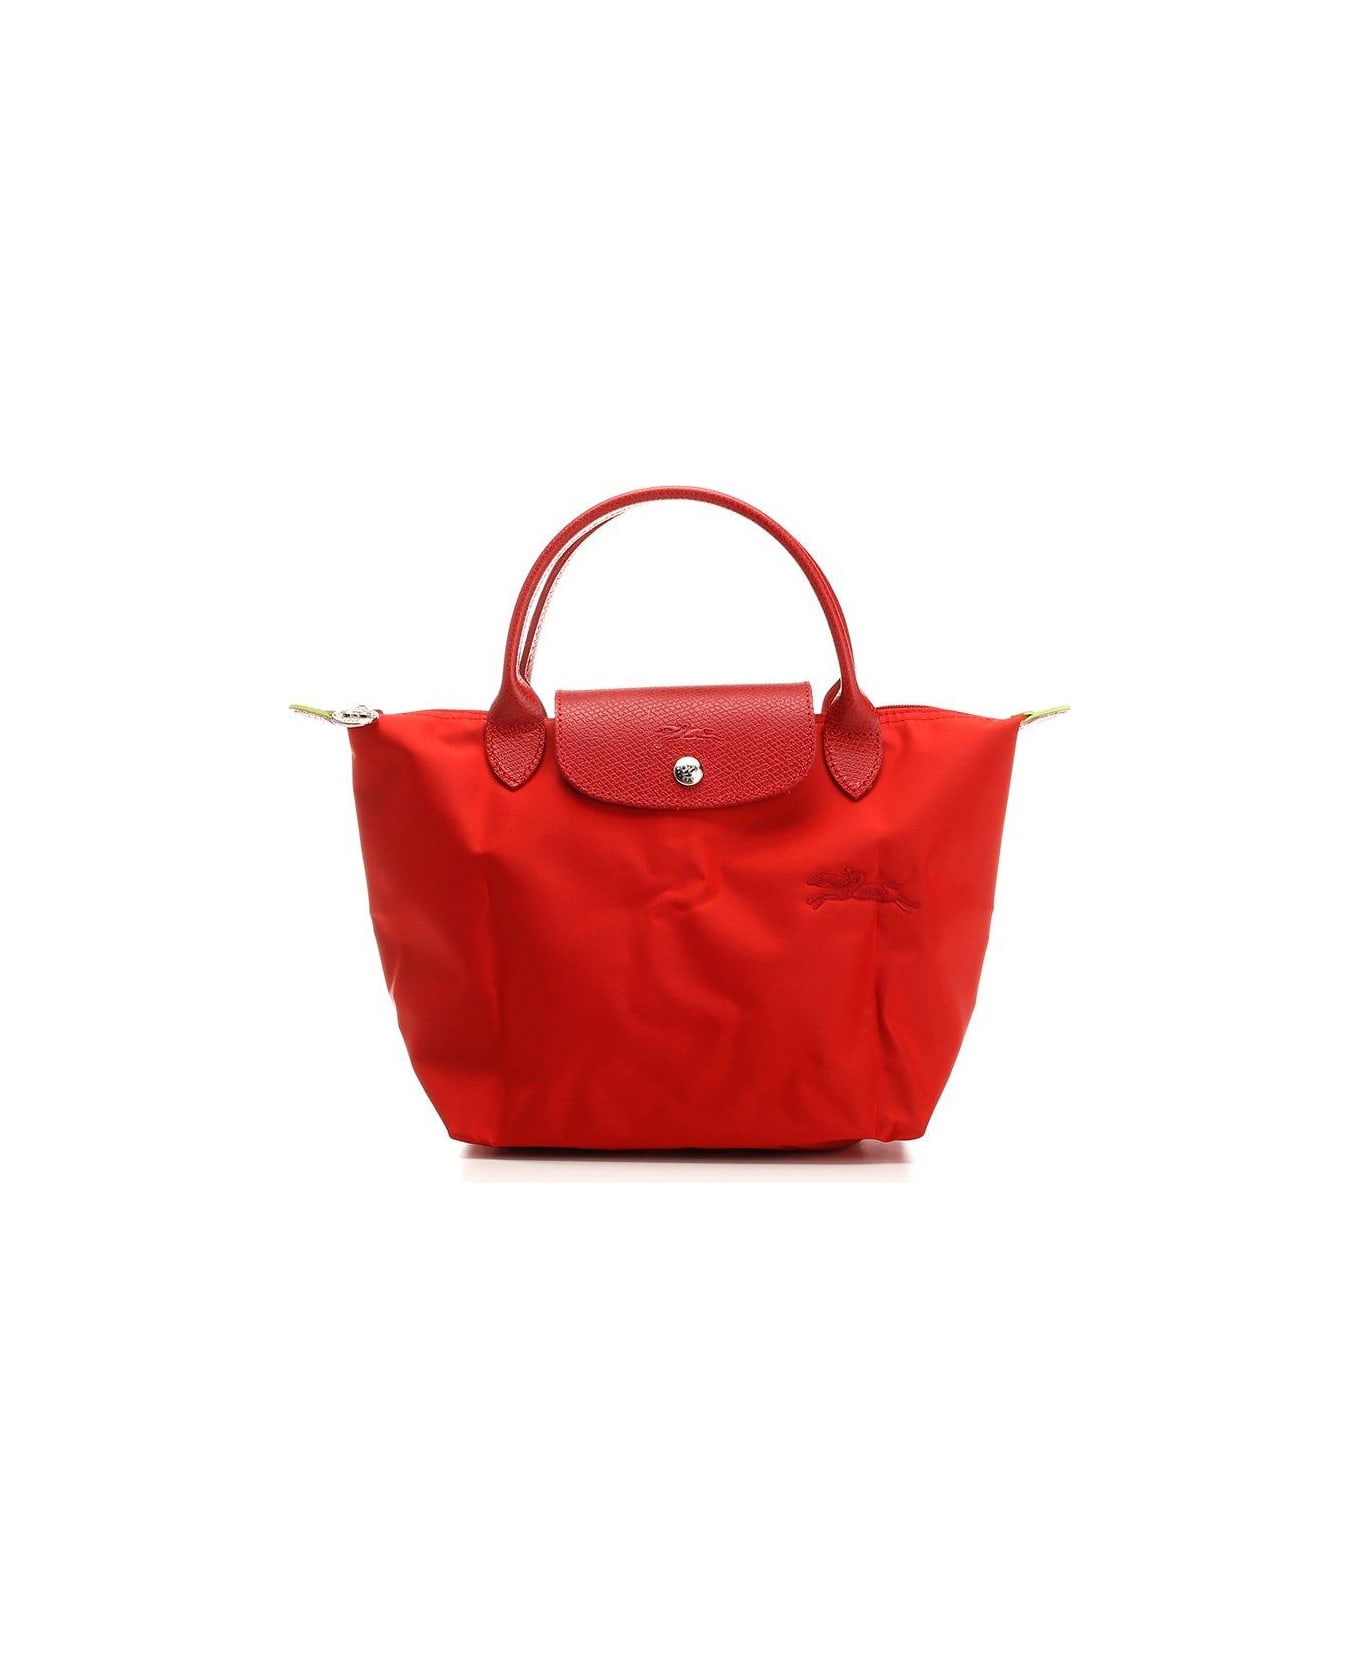 Longchamp Le Pliage Small Top Handle Bag - Red トートバッグ